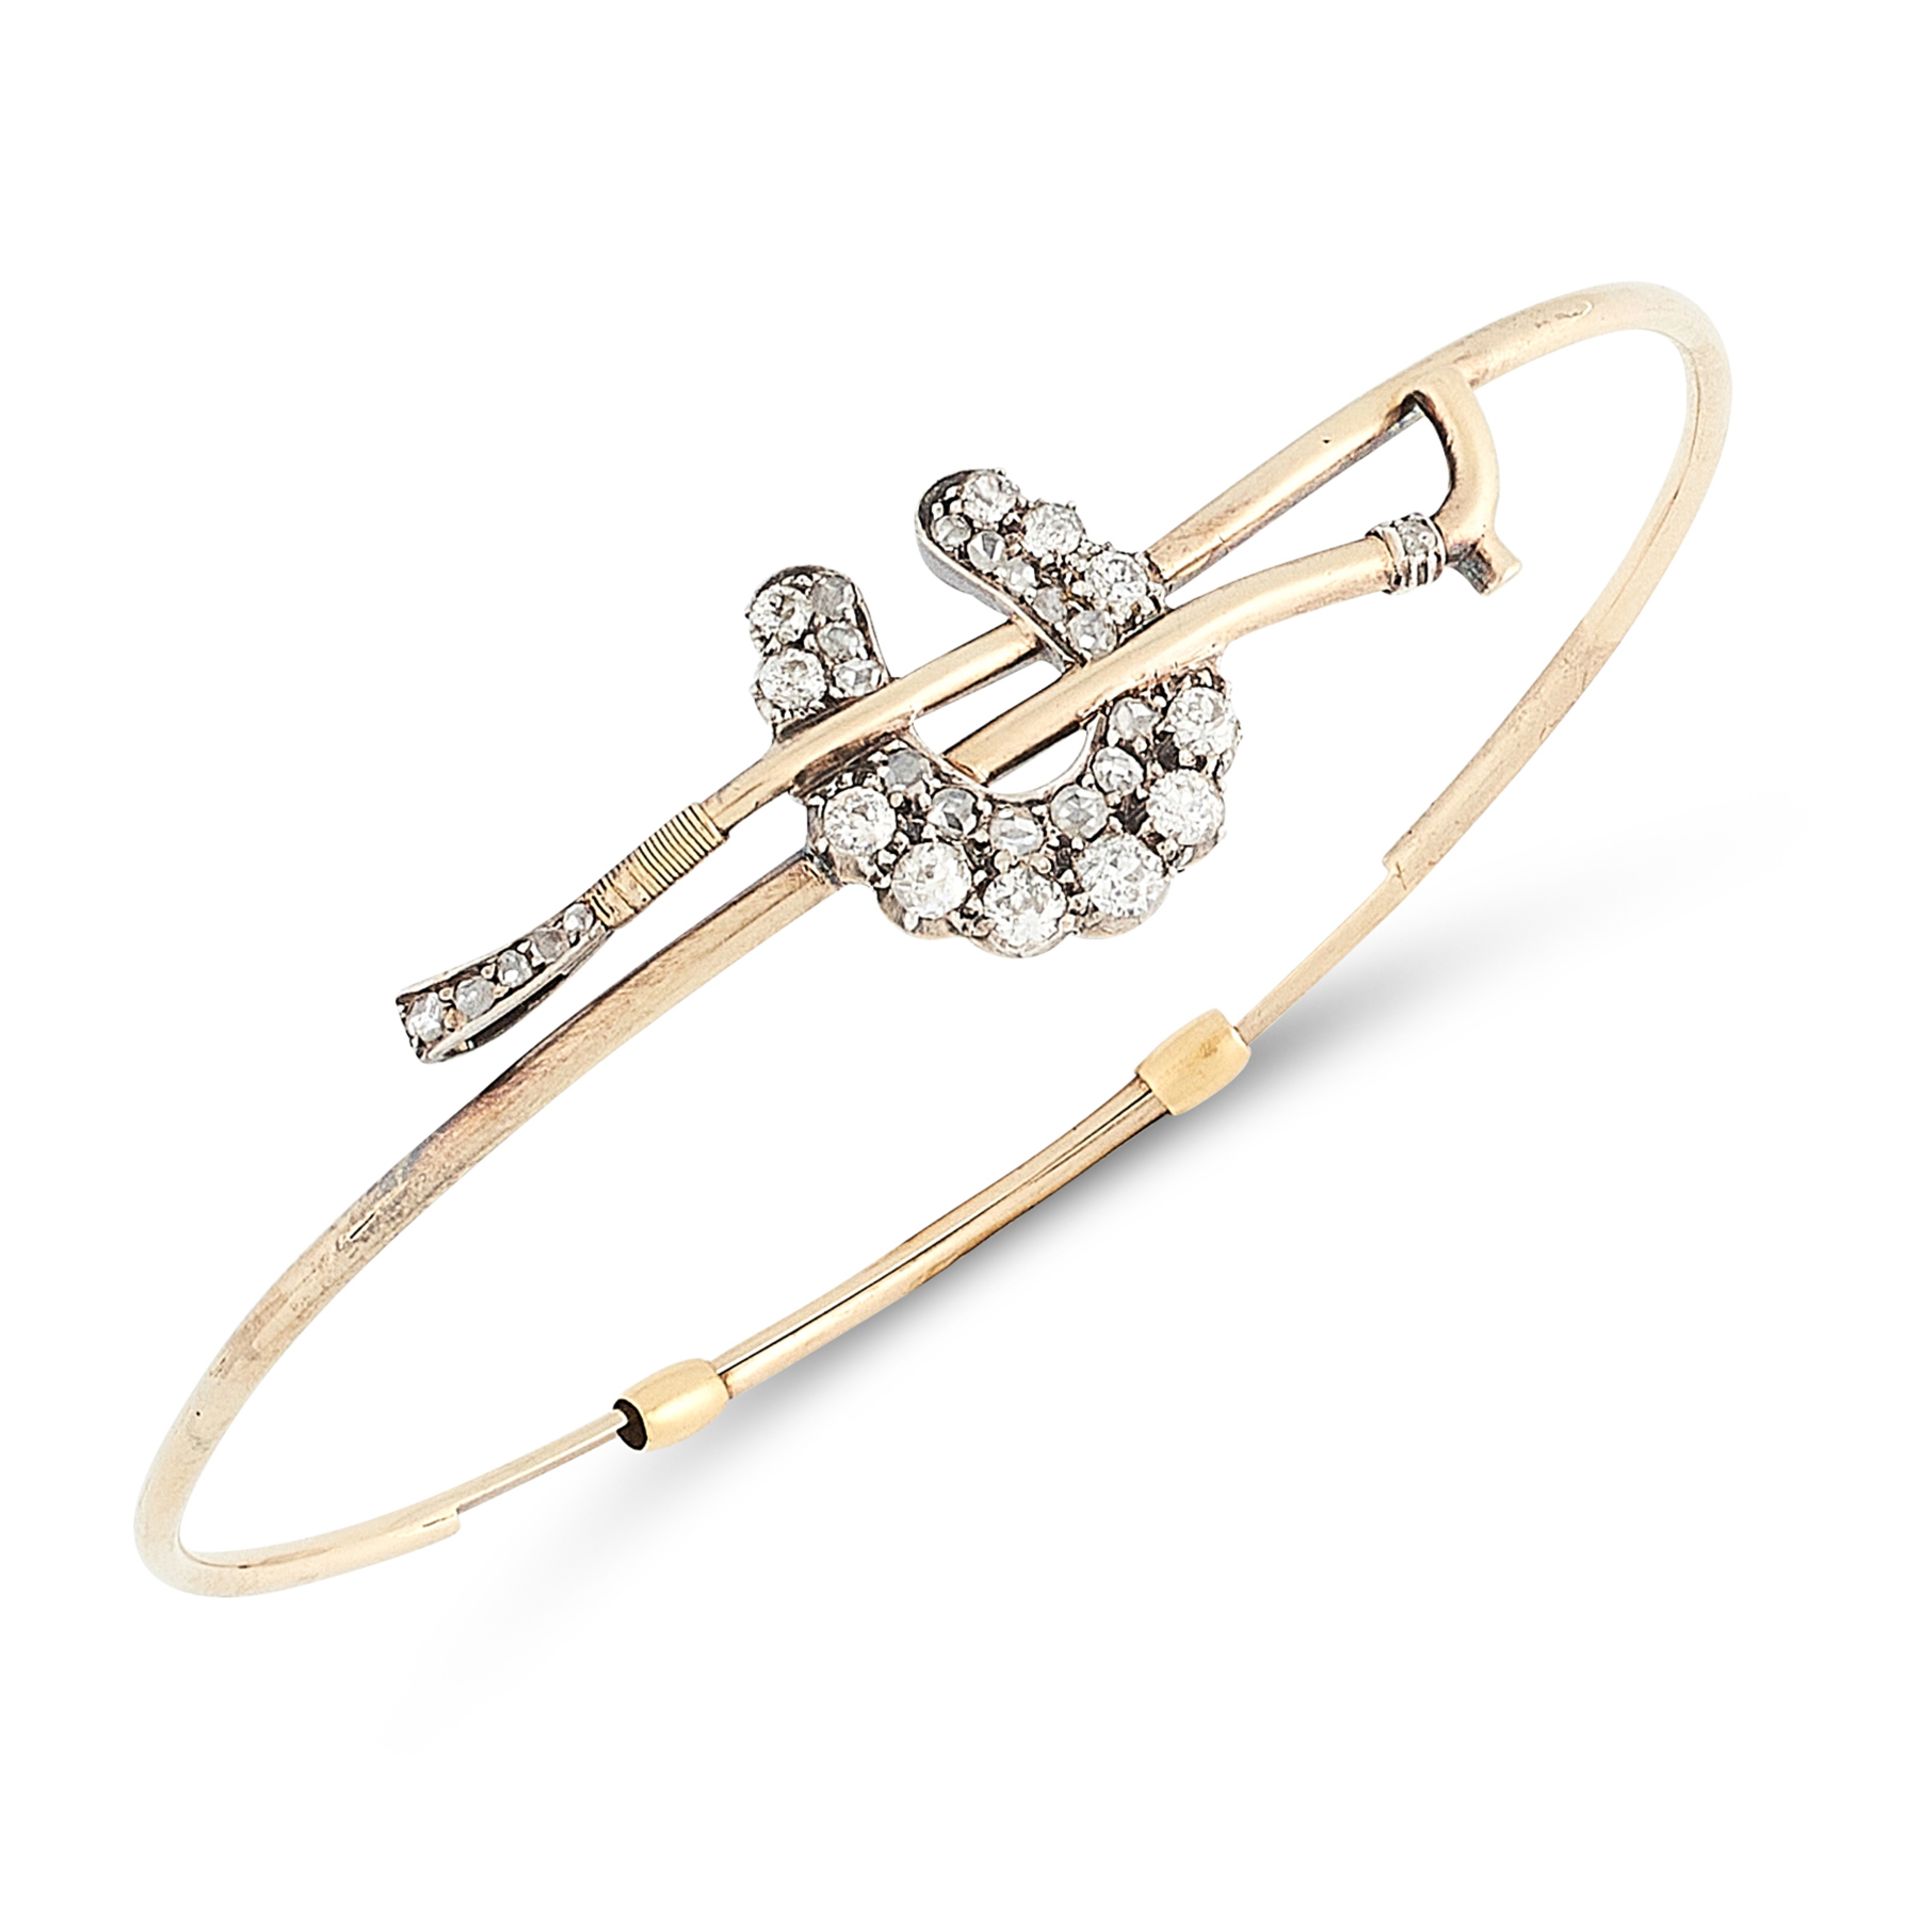 AN ANTIQUE DIAMOND BANGLE, 19TH CENTURY in yellow gold, designed as a riding crop, with applied